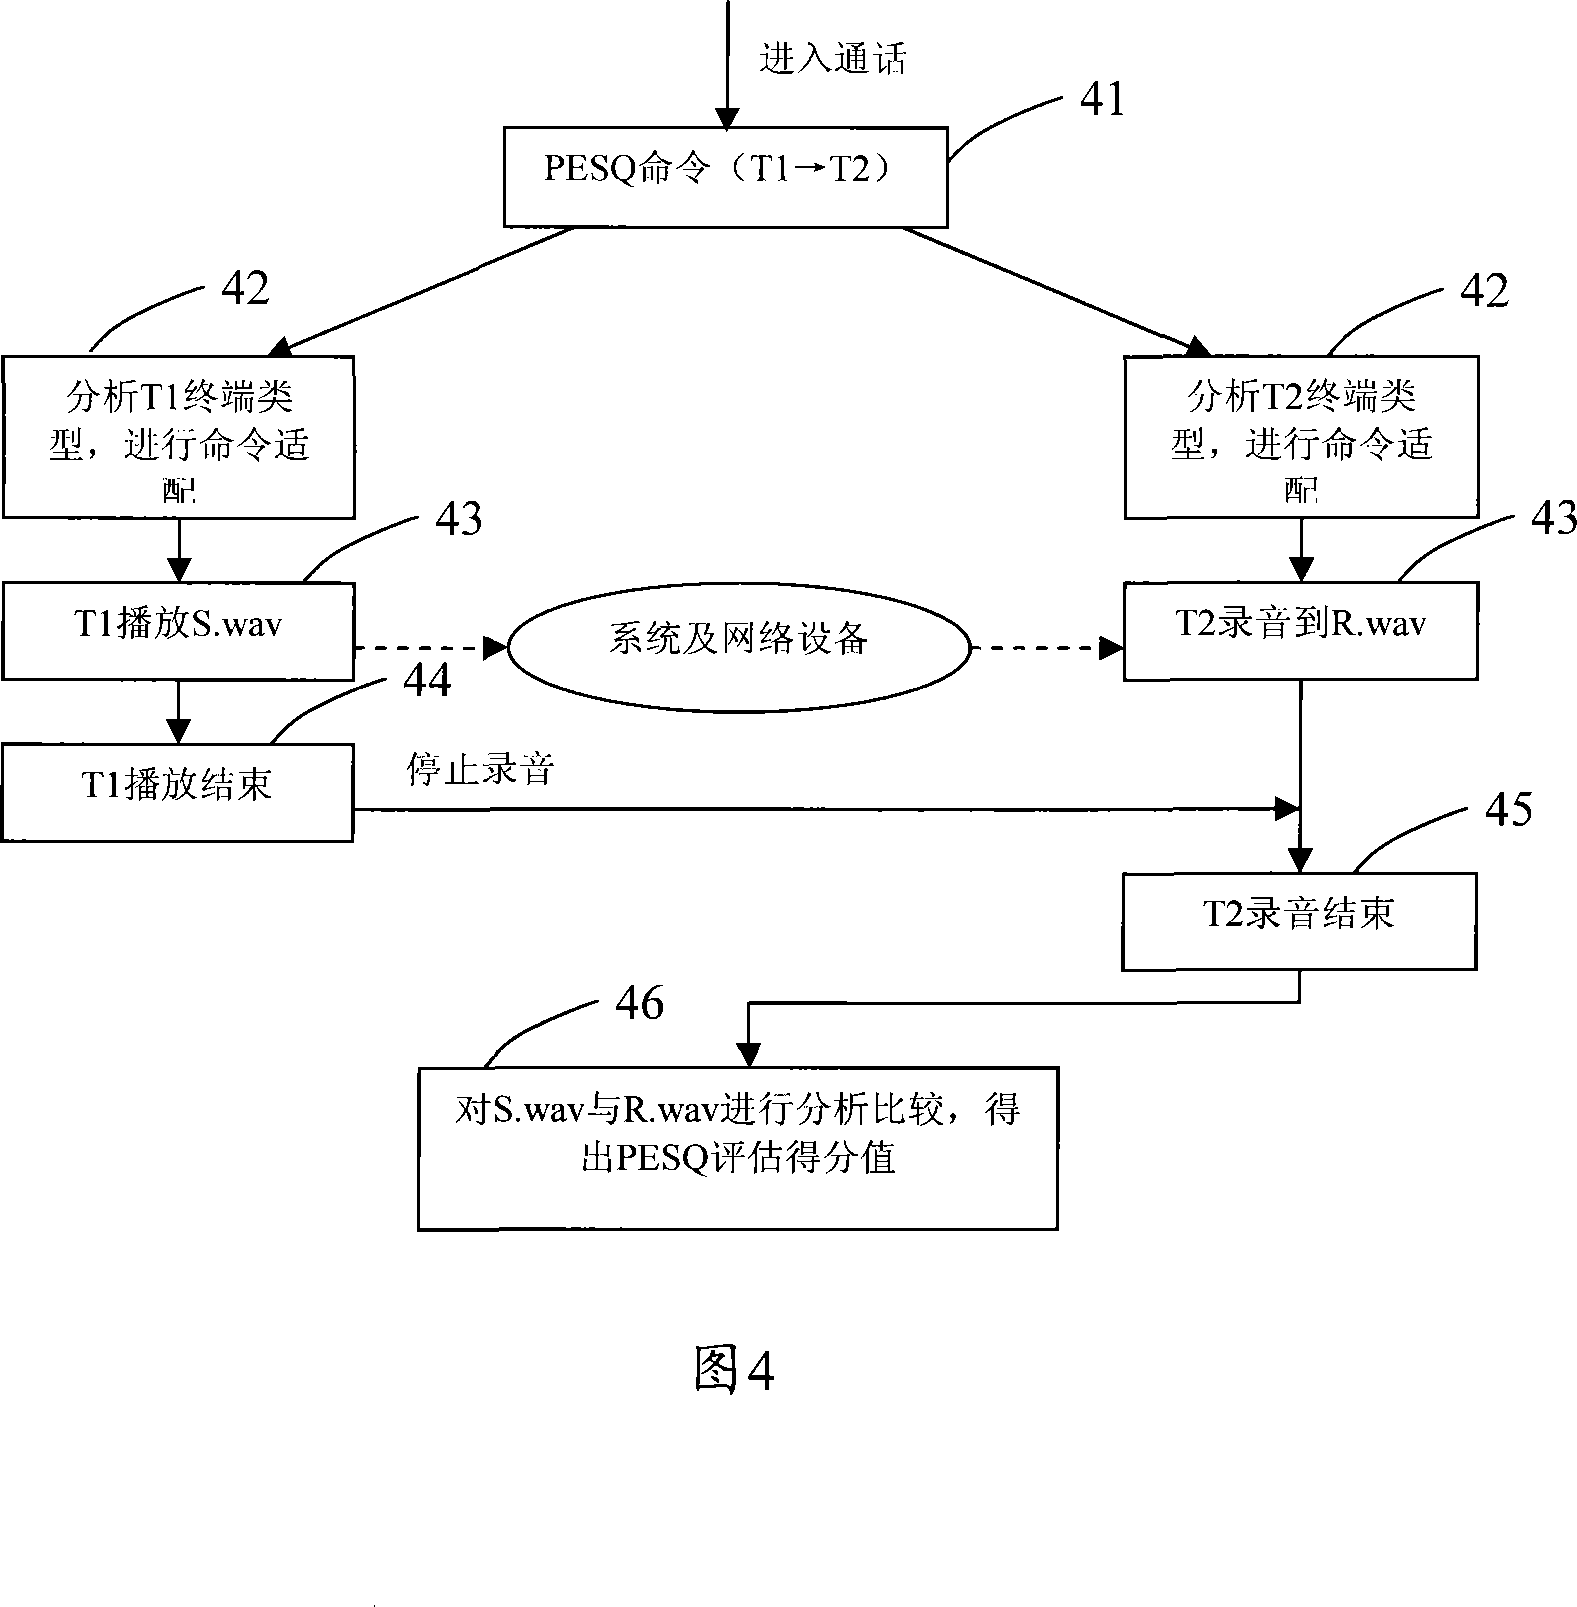 A auto-dial testing system, device and method thereof